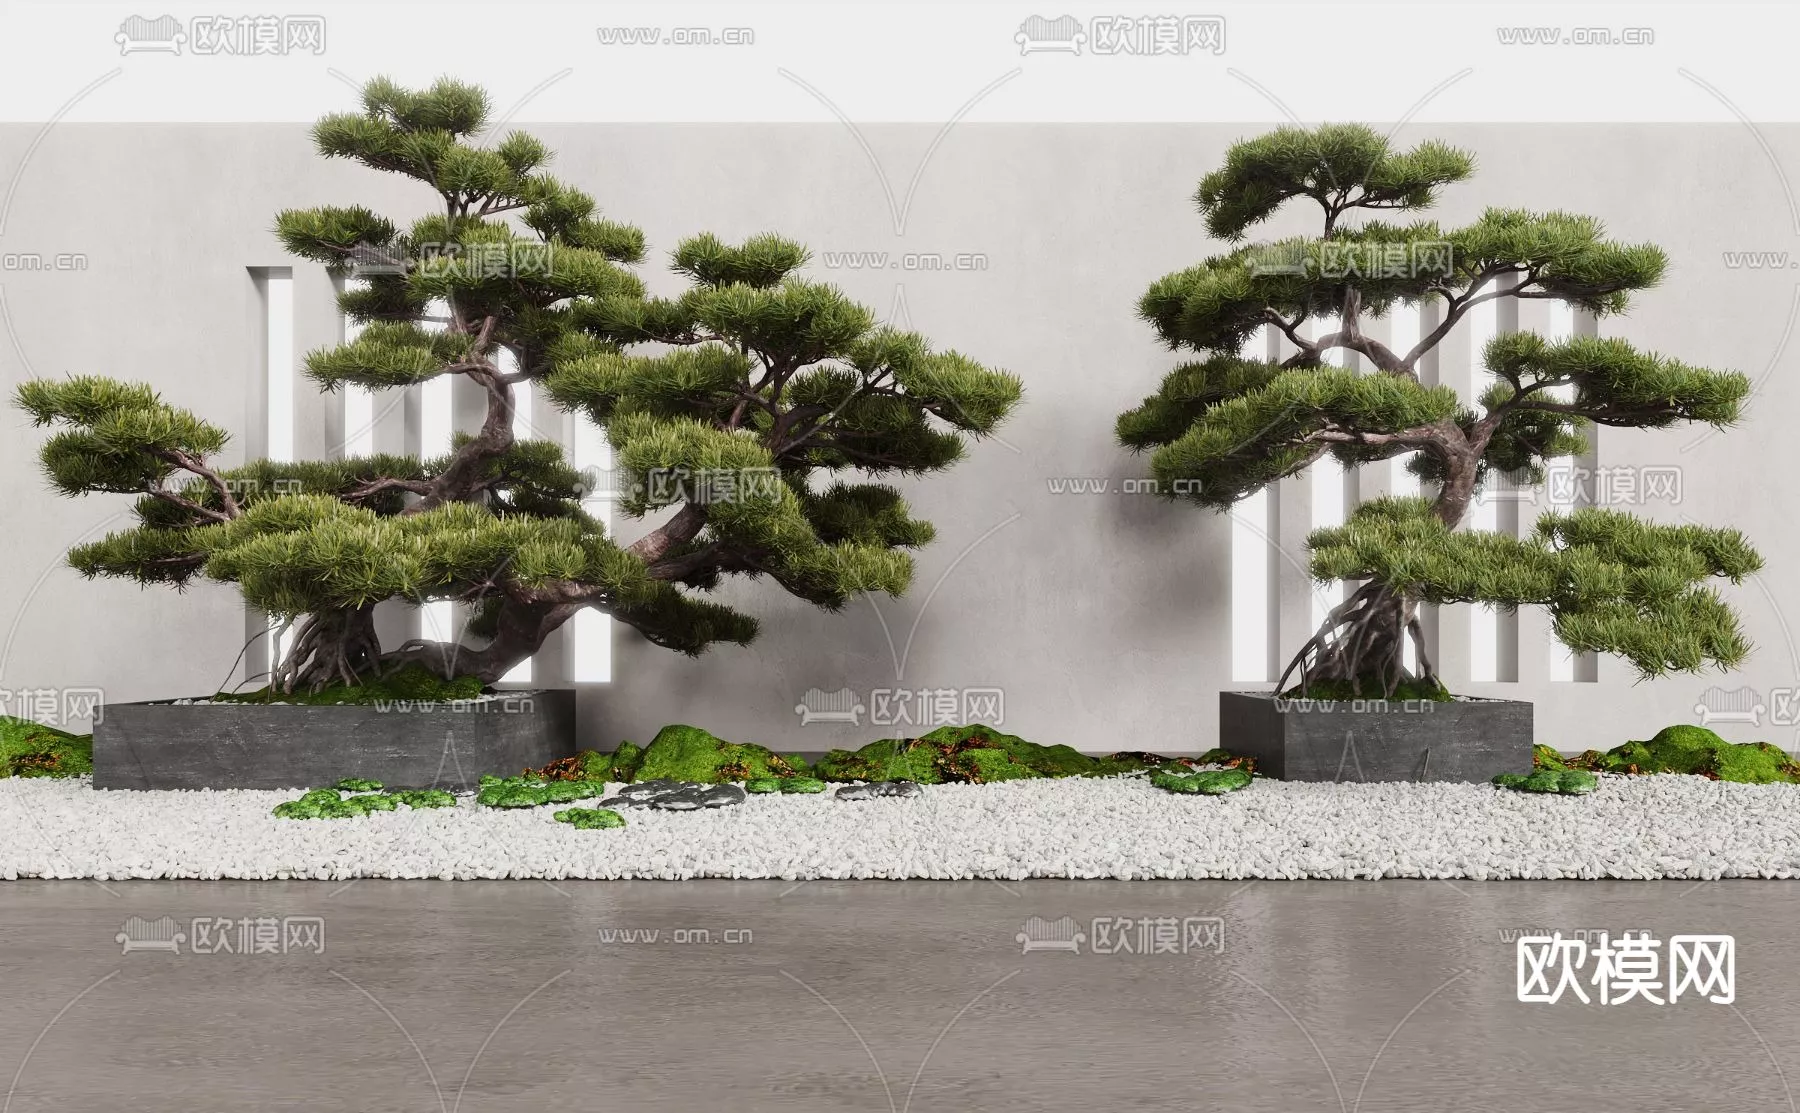 MODERN TREE - SKETCHUP 3D MODEL - VRAY OR ENSCAPE - ID15389